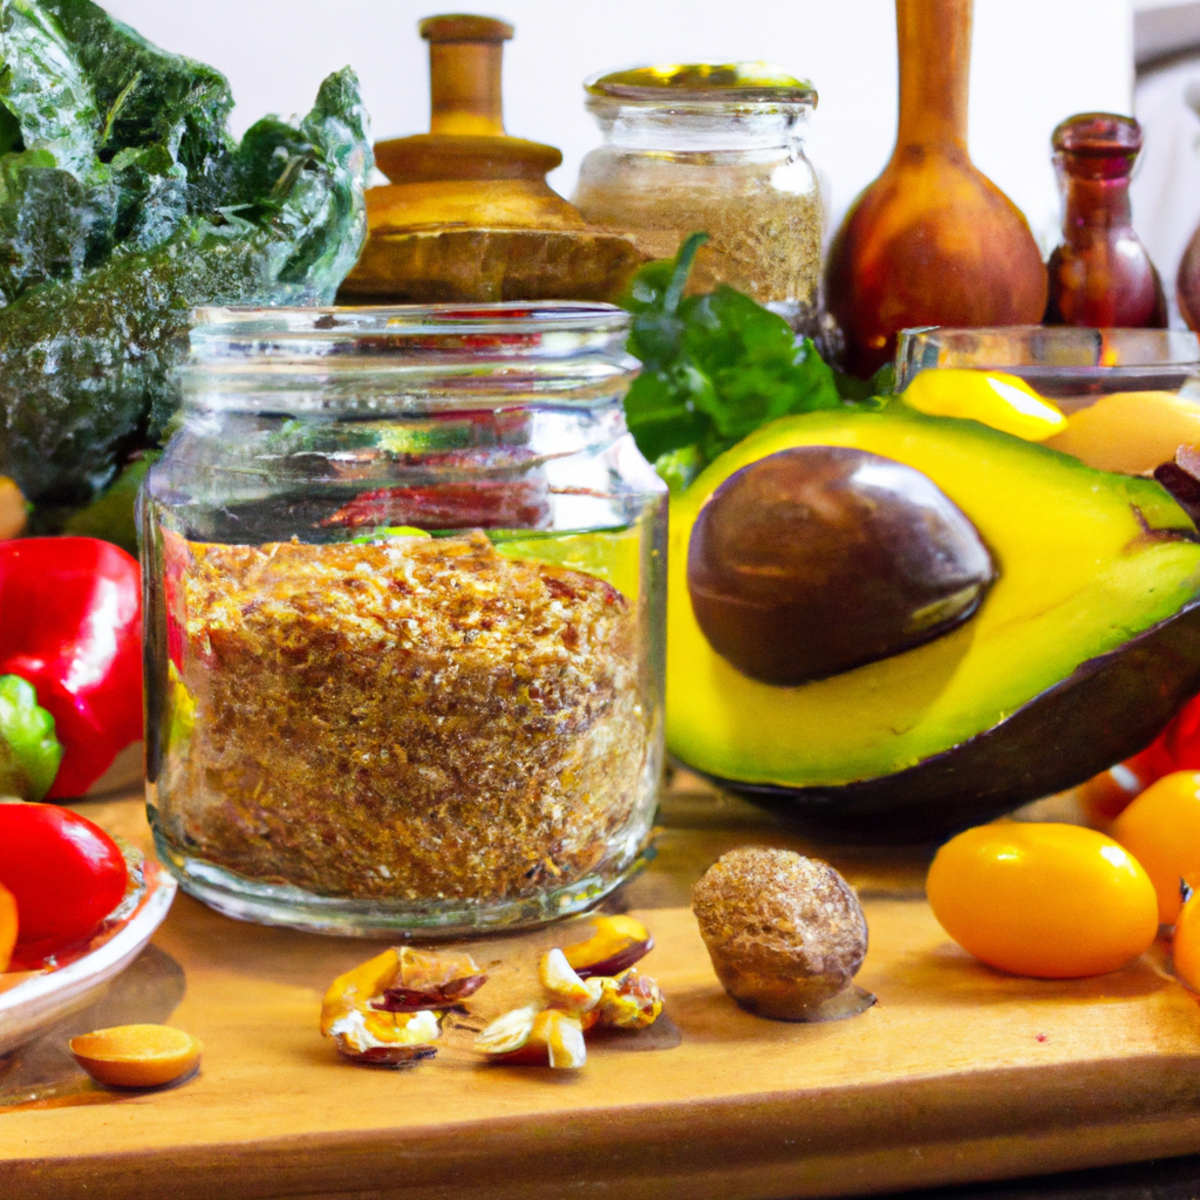 The photo features a colorful array of fresh fruits and vegetables arranged on a wooden cutting board. A ripe avocado, juicy tomatoes, crisp bell peppers, and leafy greens are just a few of the vibrant ingredients on display. In the background, a glass jar filled with quinoa and a small bowl of nuts add to the wholesome feel of the image. The natural lighting highlights the textures and colors of the produce, making it look almost too good to eat. This photo perfectly captures the essence of a plant-based diet and its emphasis on nourishing, whole foods.